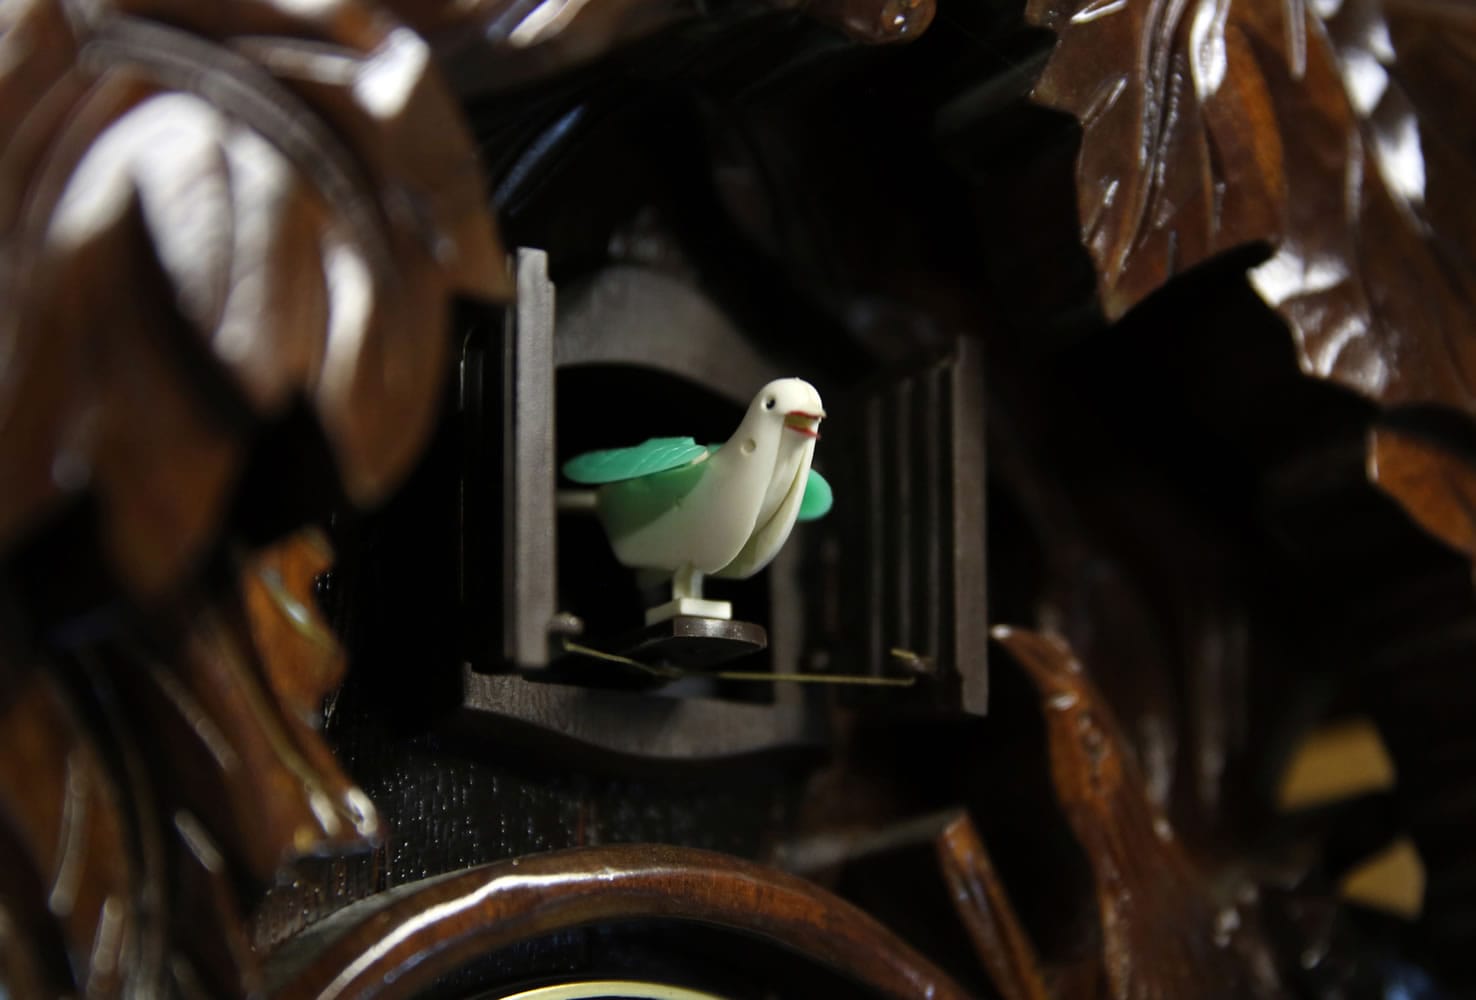 Mike De Sisti/Milwaukee Journal Sentinel
A traditional cuckoo bird pops out of a quartz battery-operated cuckoo clock at Bill Galinsky's workshop in Waukesha, Wis.